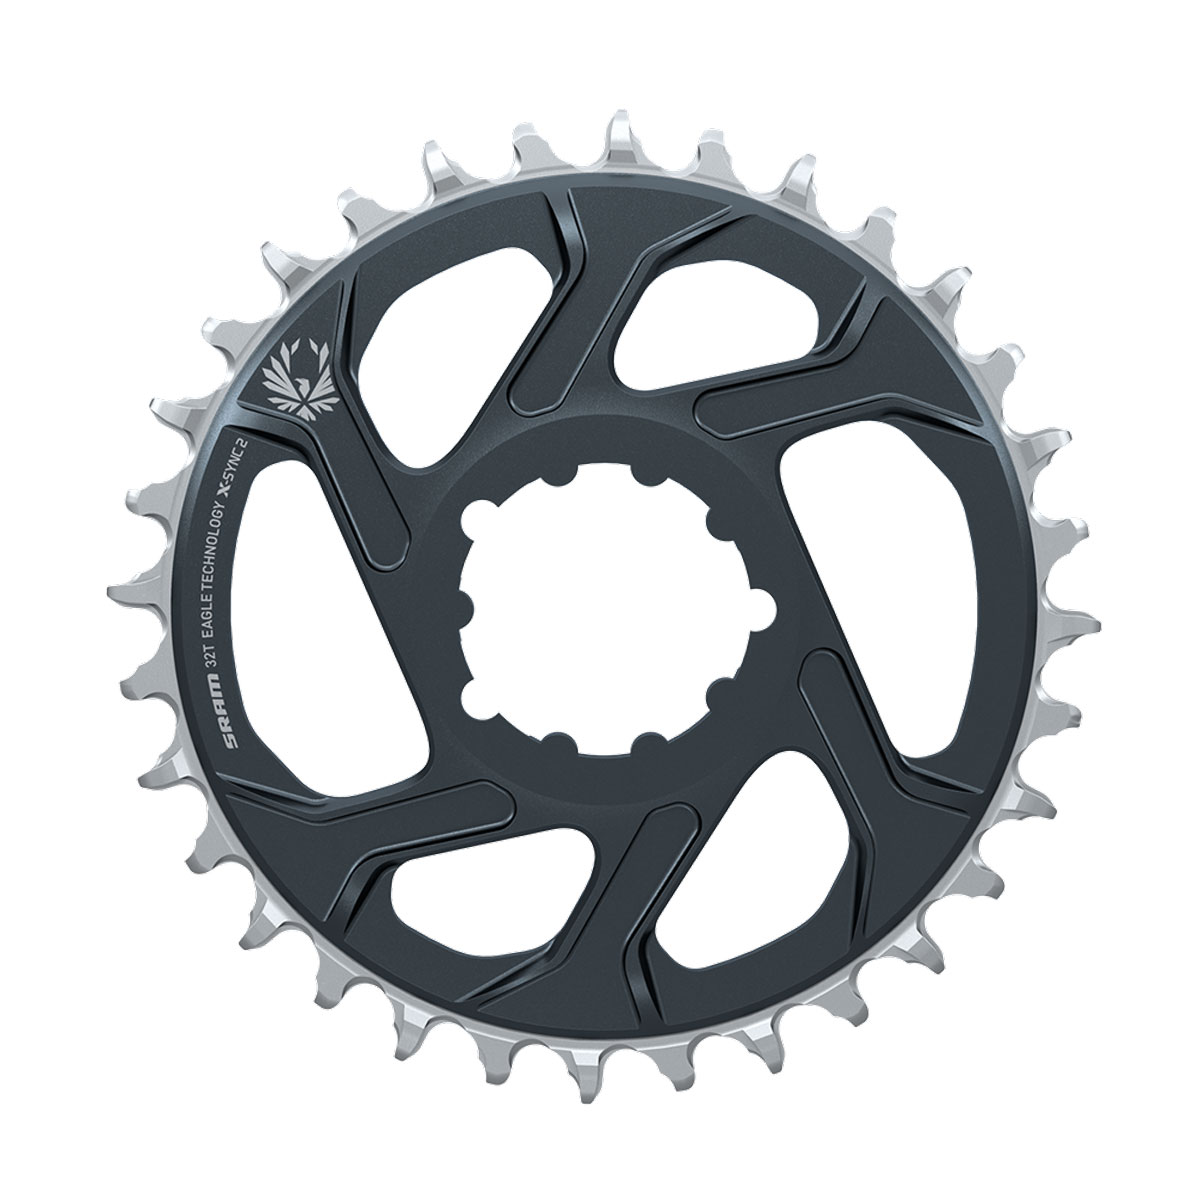 X-SYNC 2 Eagle™ Chainring Direct Mount